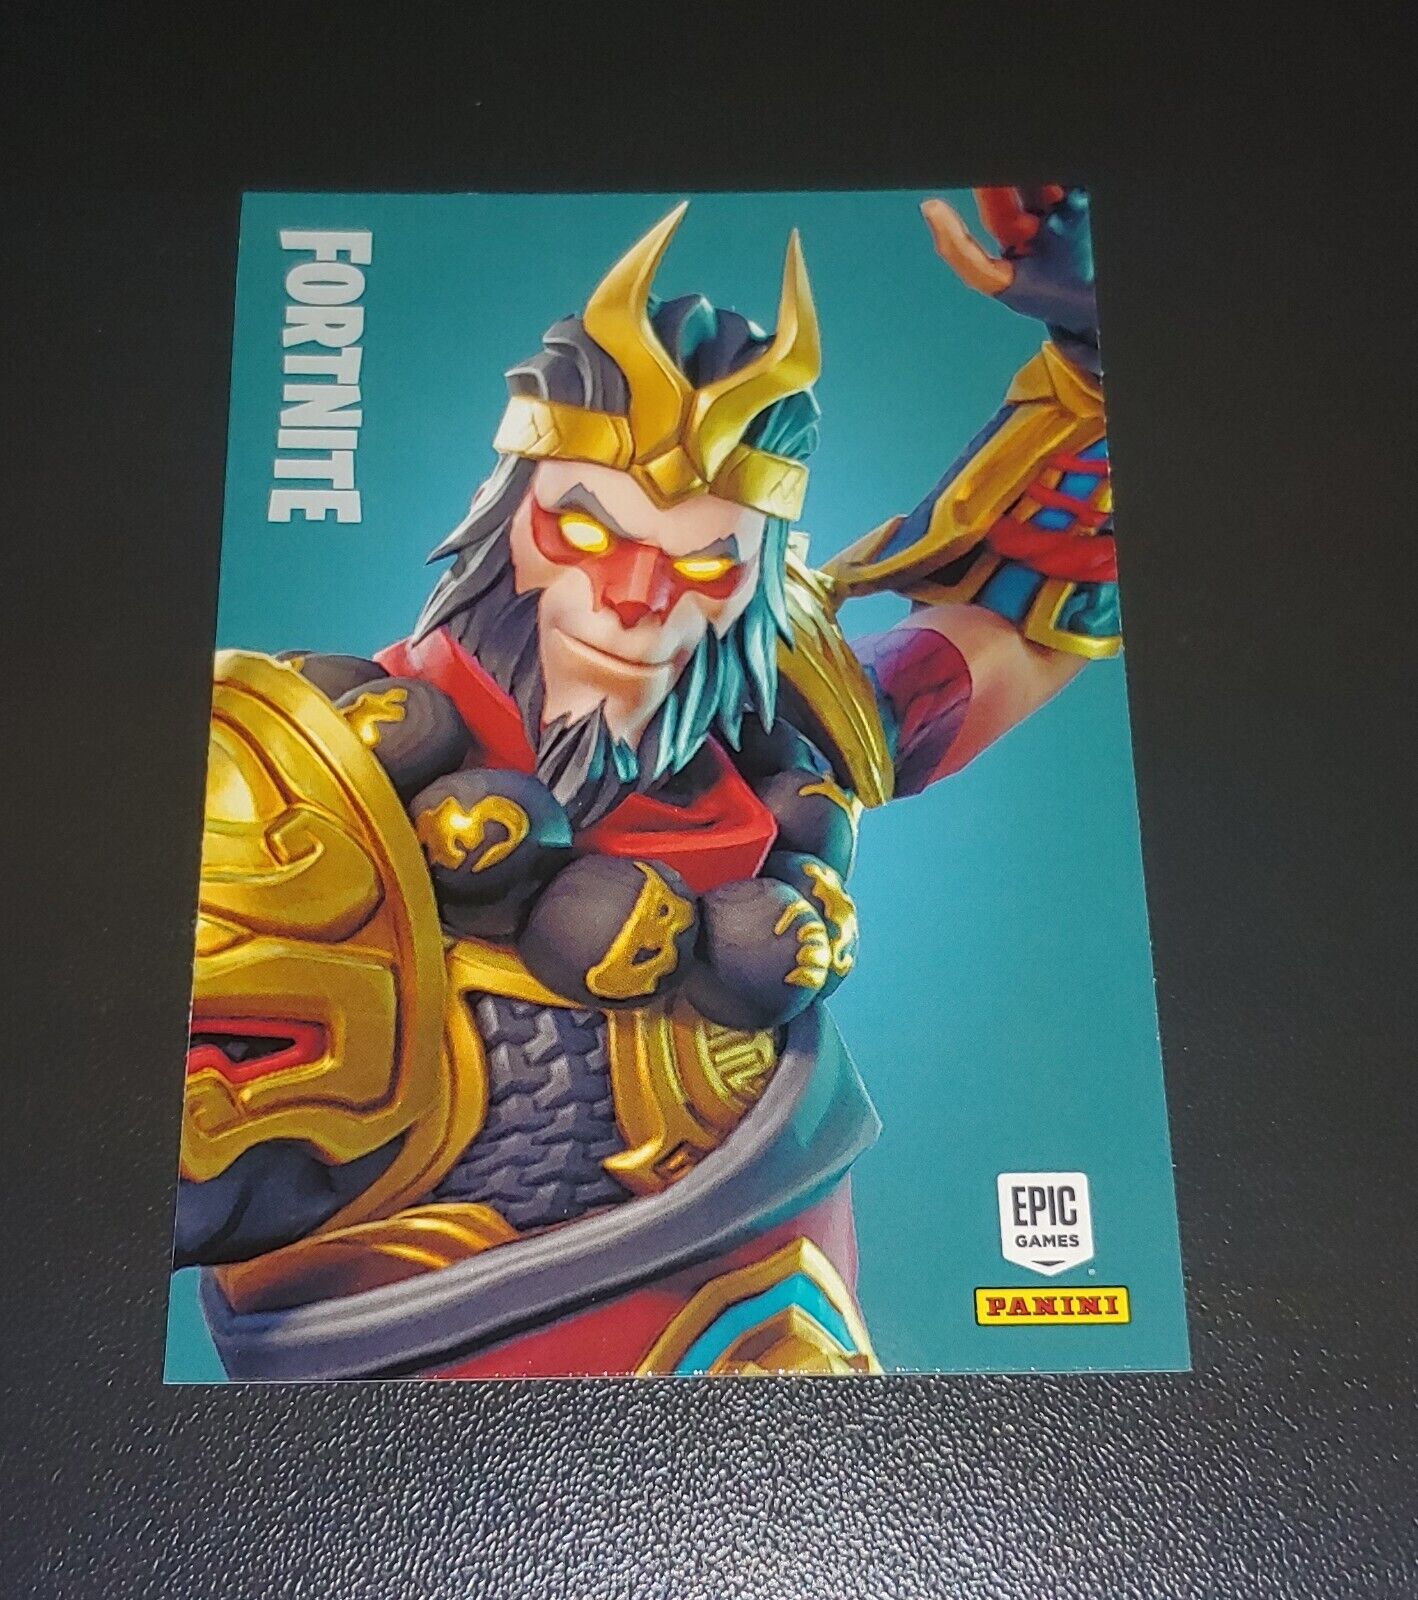 2019 Panini Fortnite Series 1 #299 Wukong 💎 Legendary Outfit